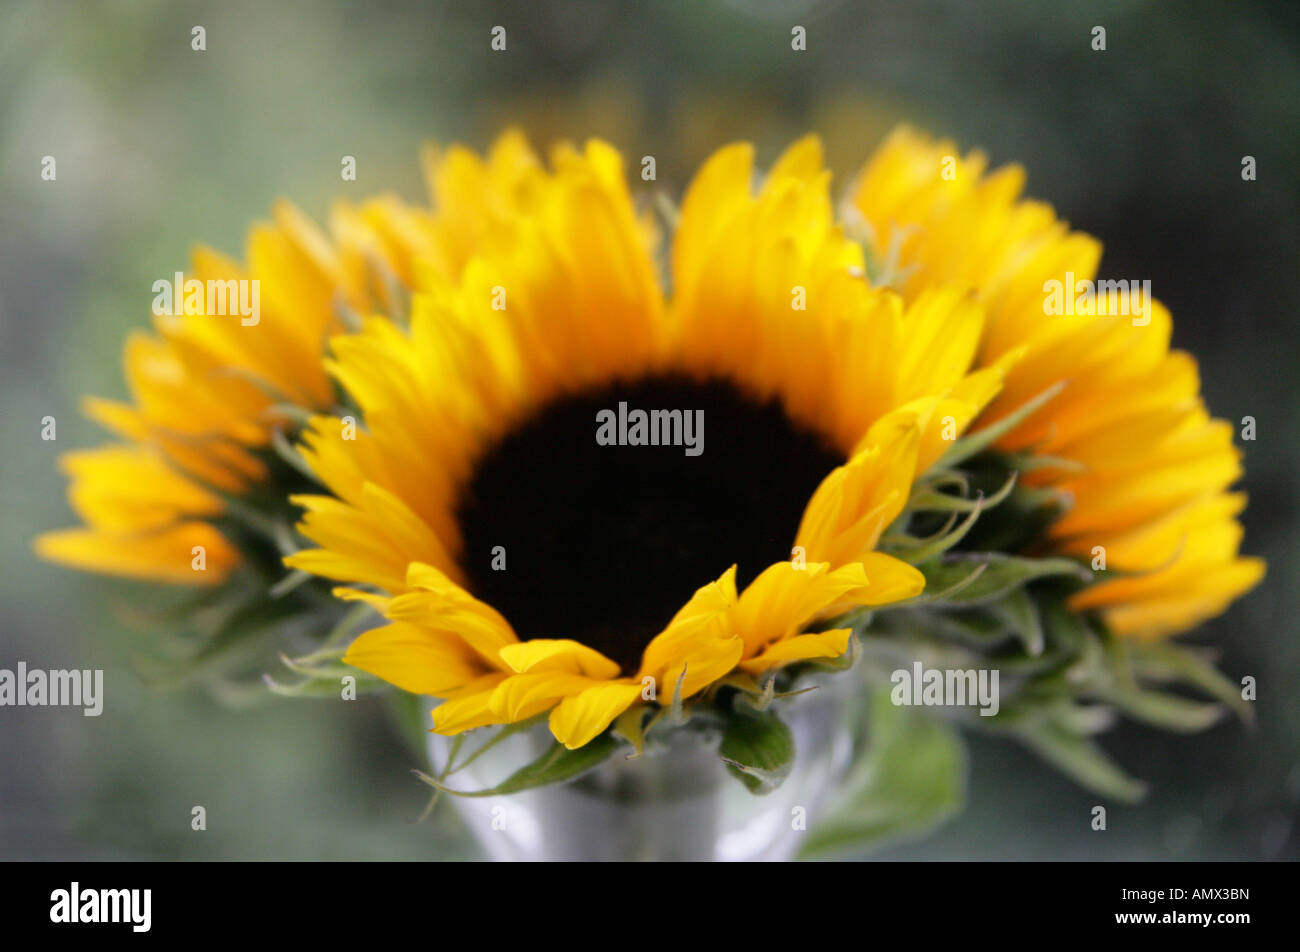 Three Sunflowers in a Glass Pot, Helianthus annuus, Asteraceae Stock Photo